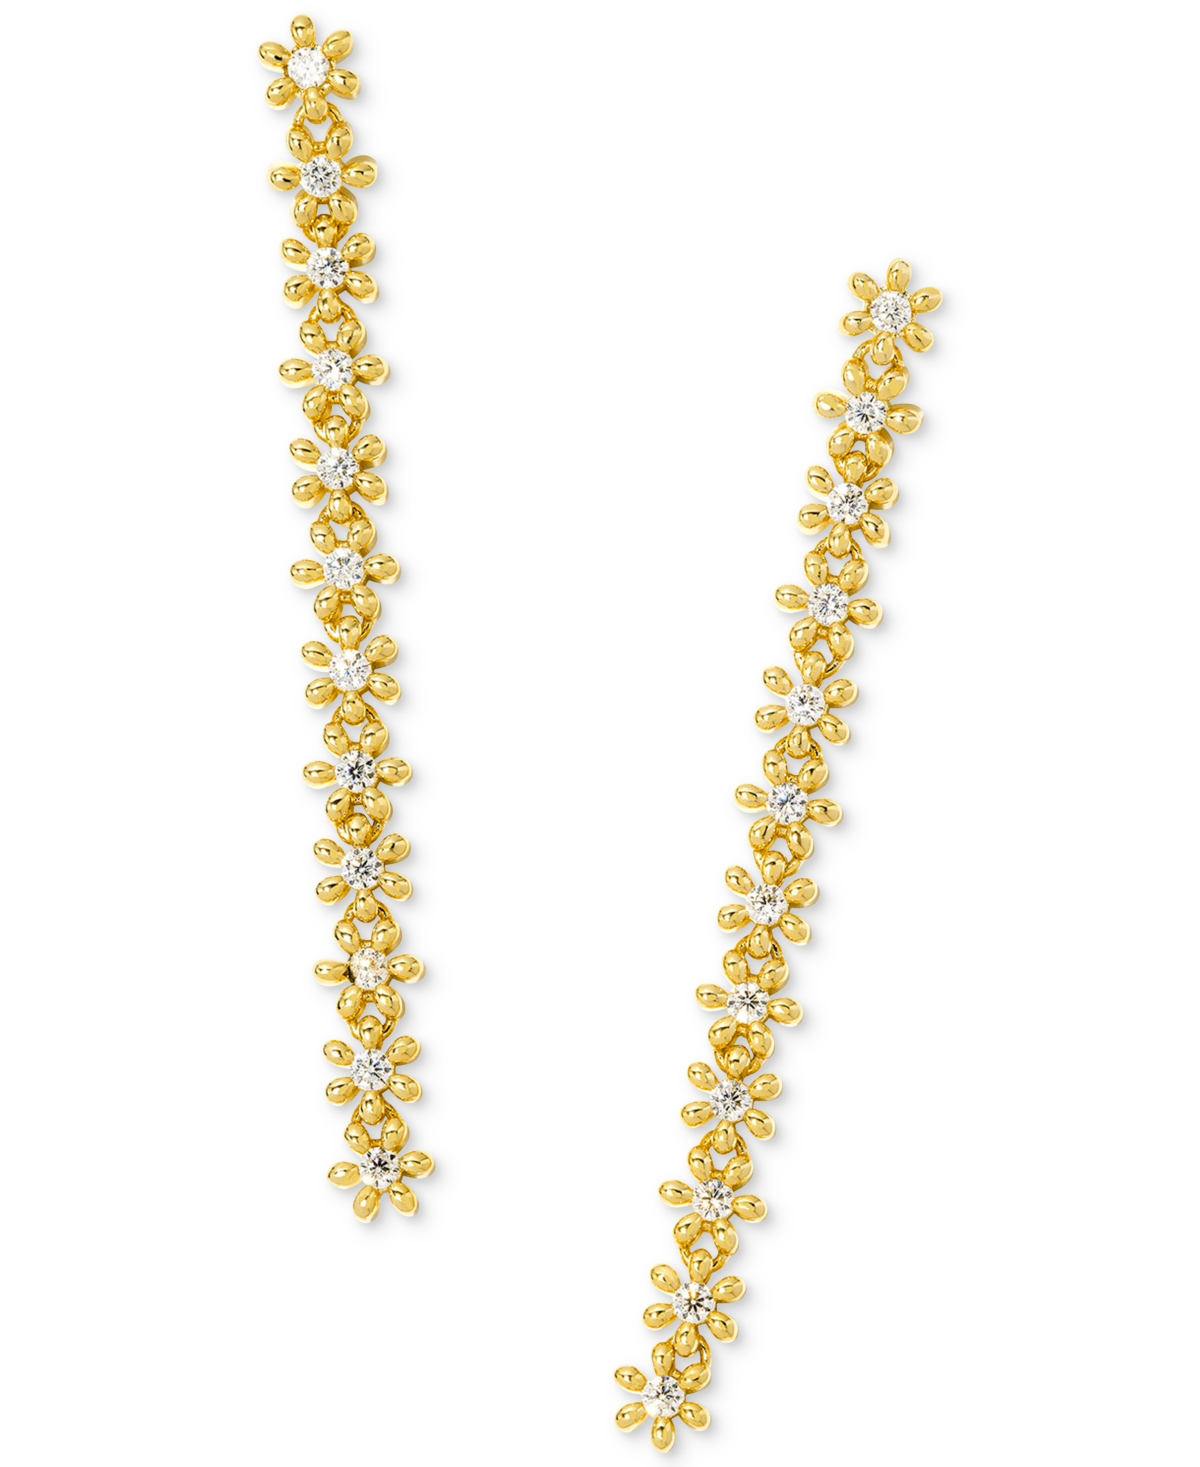 14k Gold-Plated Cubic Zirconia Daisy Chain Linear Drop Earrings - Gold White